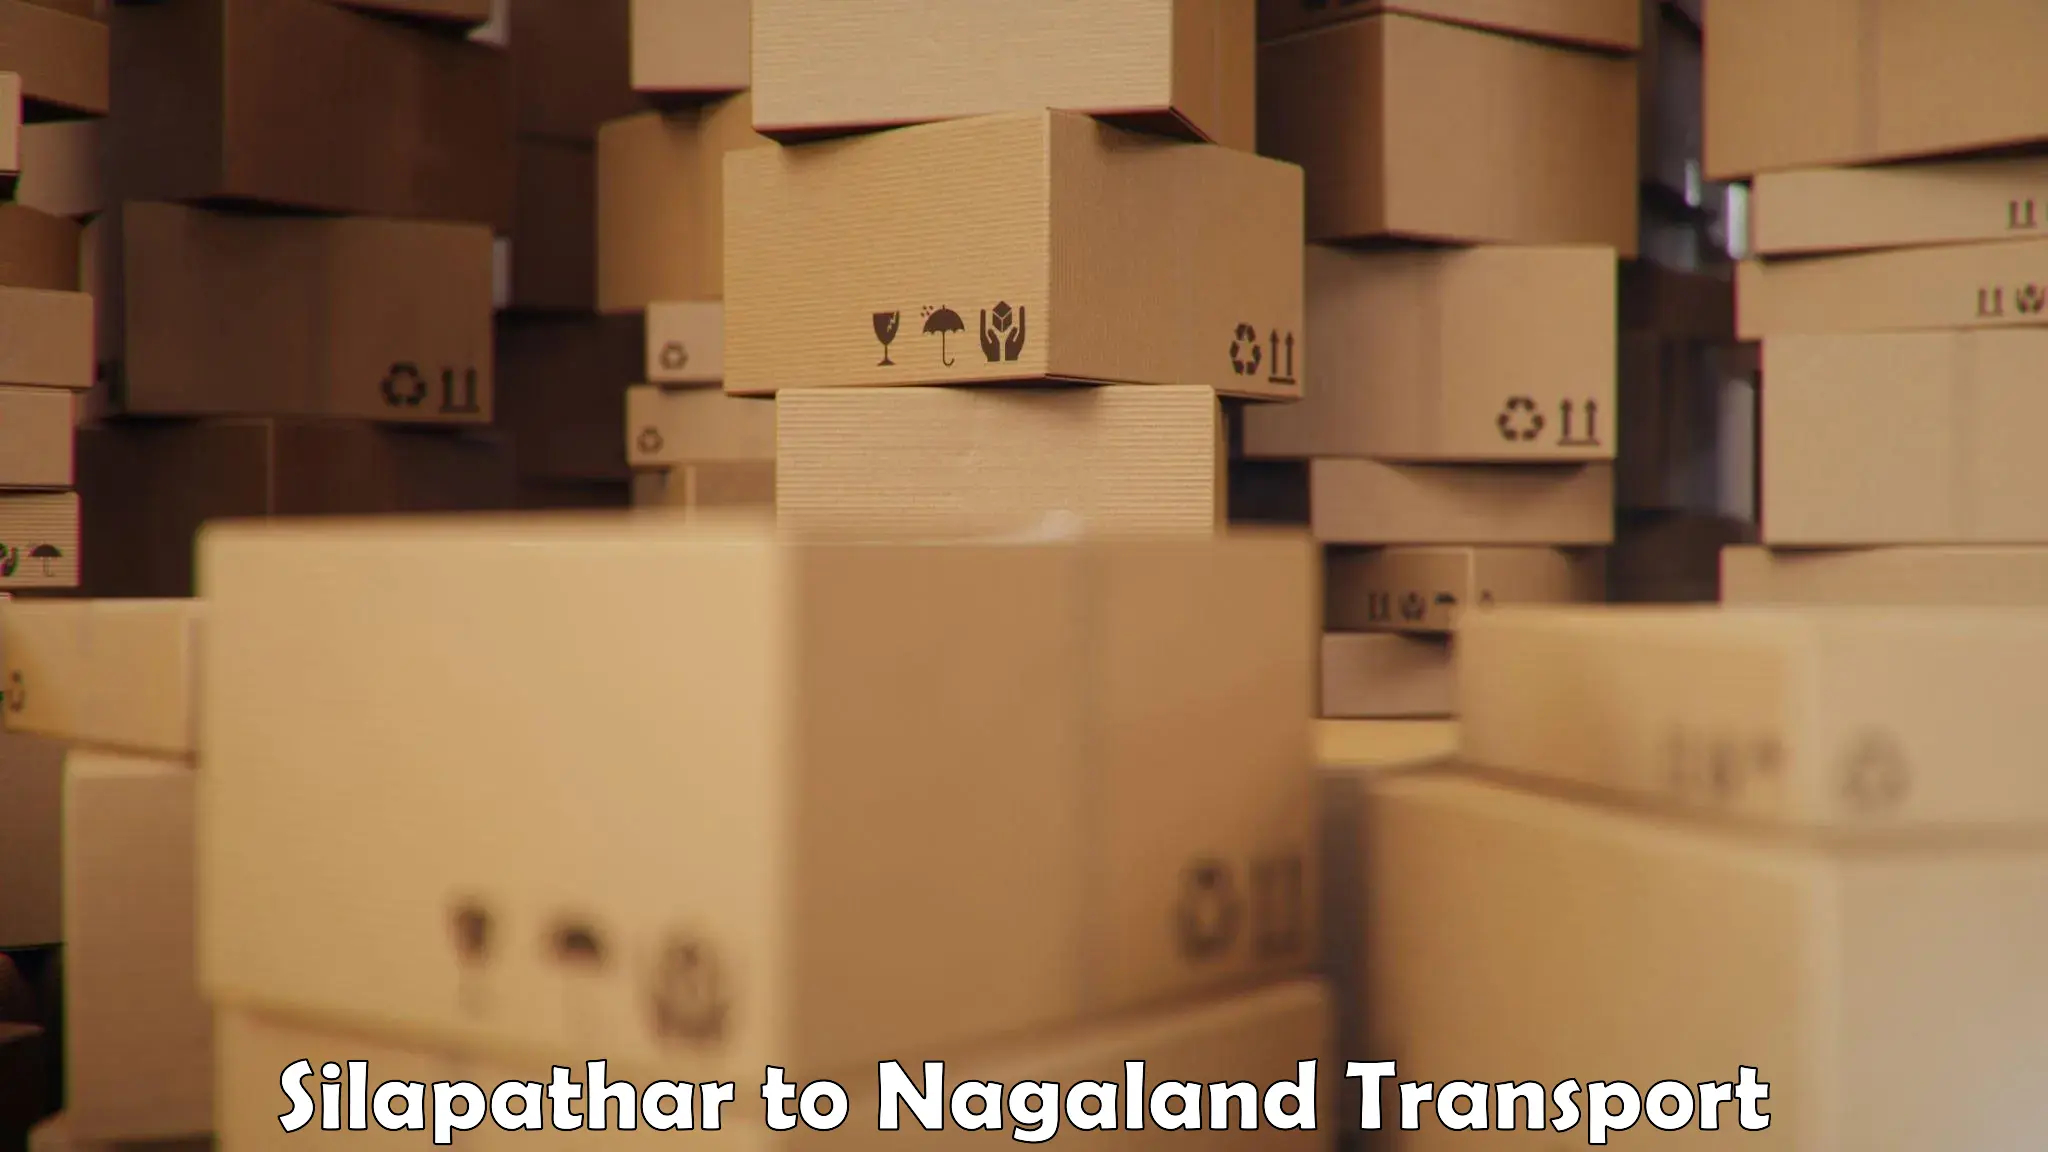 Nearest transport service Silapathar to NIT Nagaland